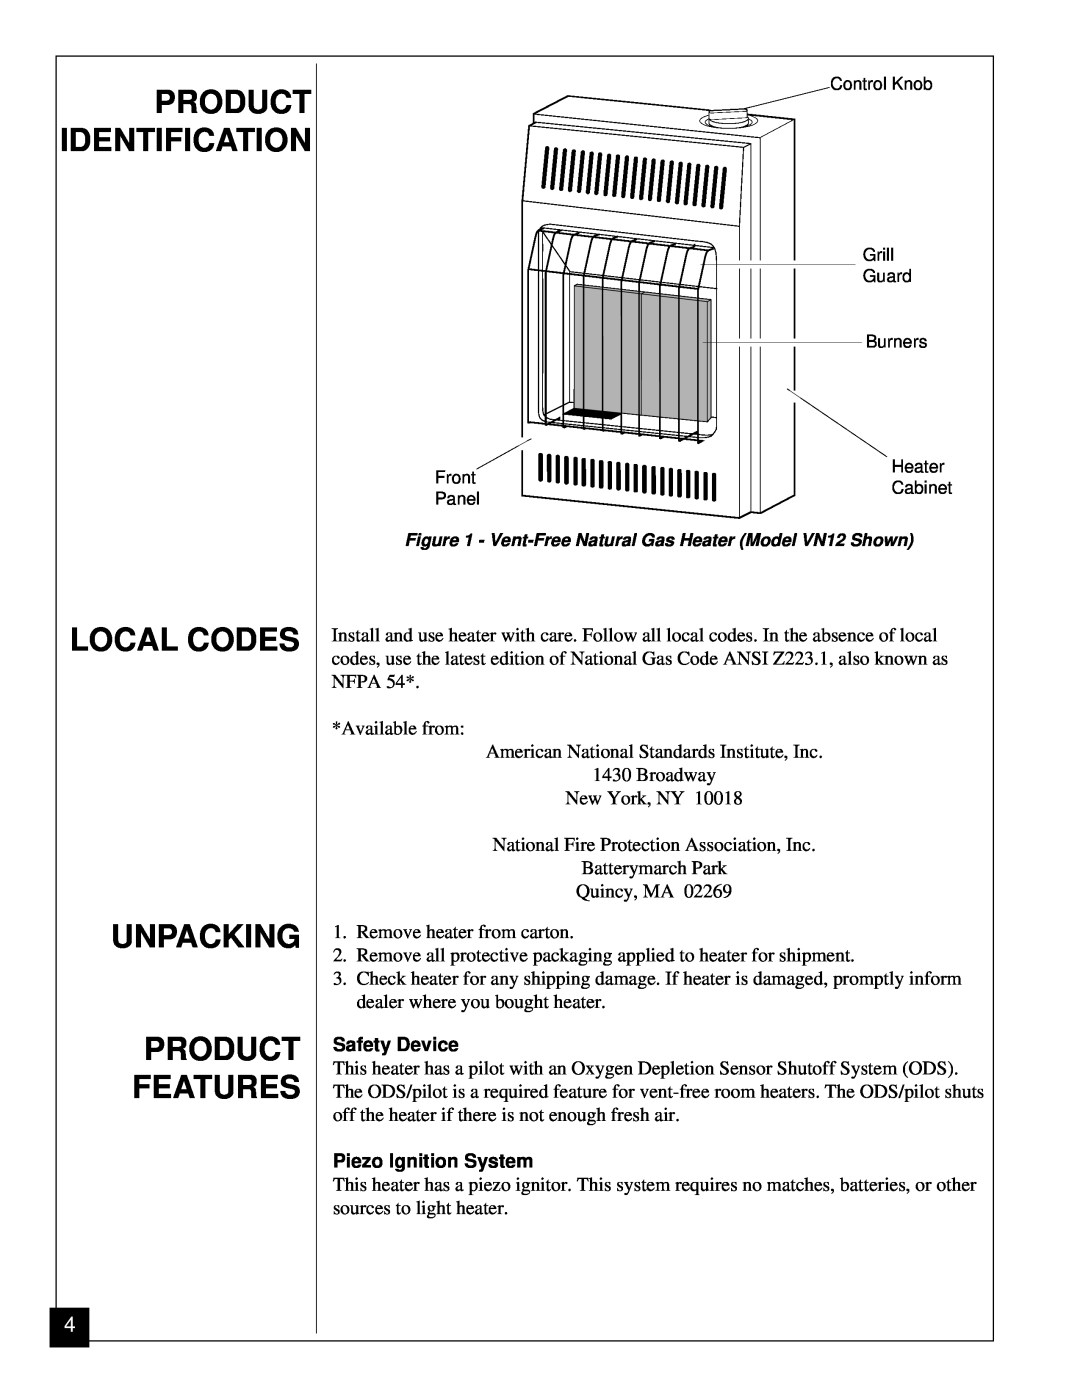 Vanguard Heating VN6A Product Identification, Local Codes Unpacking Product Features, Safety Device, Piezo Ignition System 